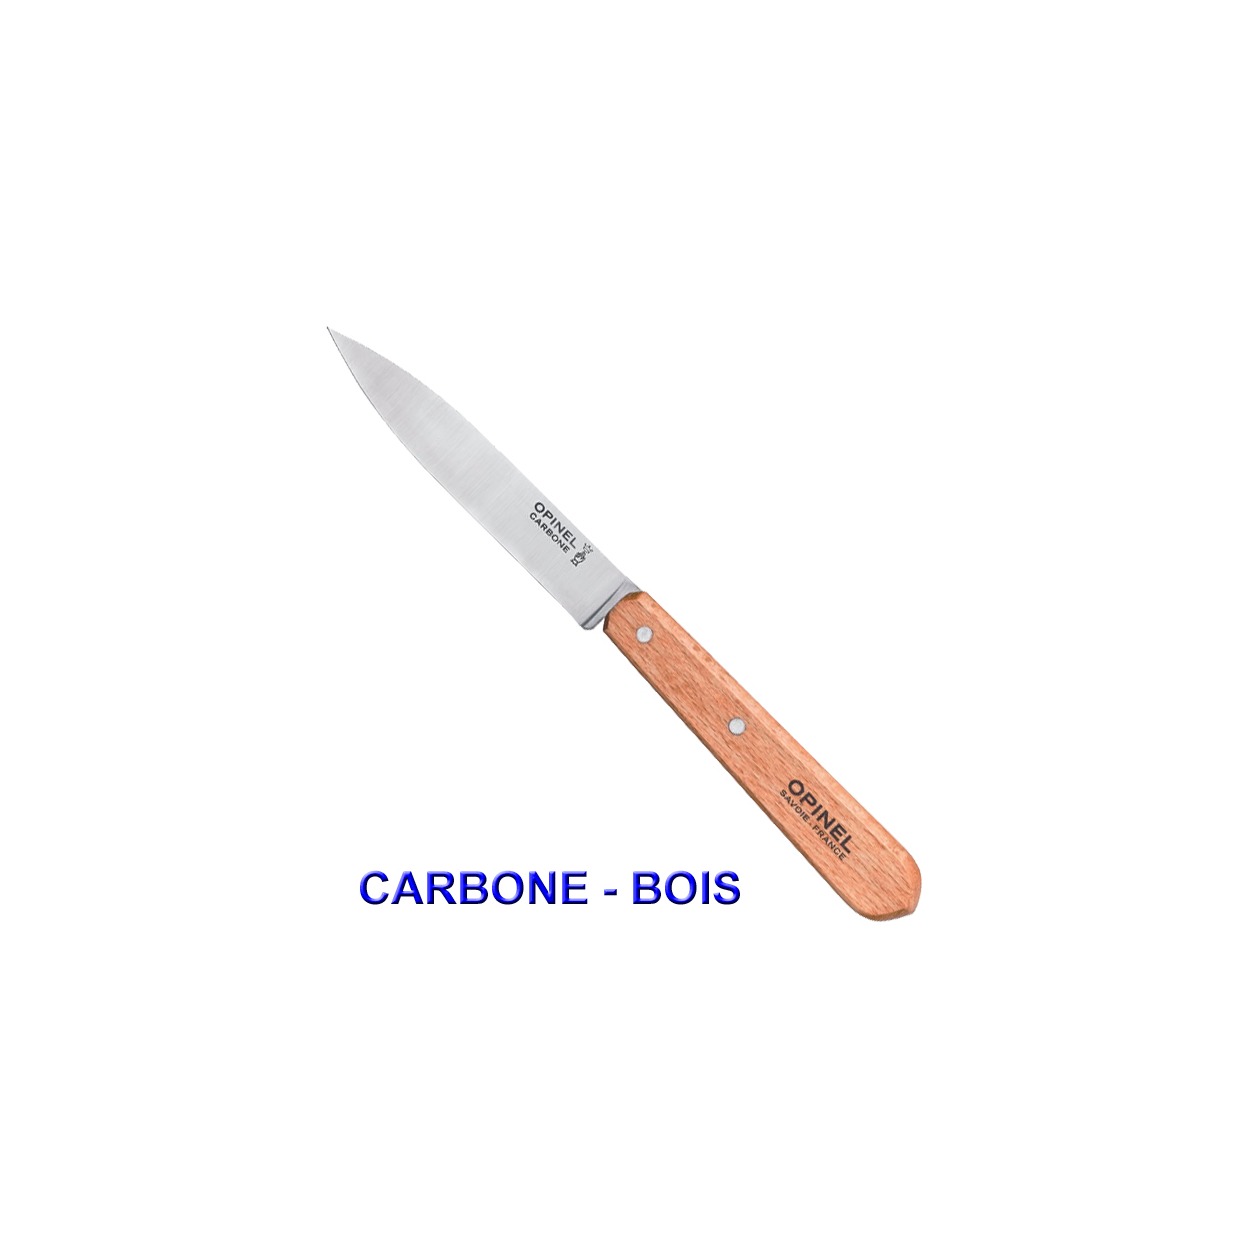 PrixCanon : Opinel - Couteau Office N112 Lame Lisse Inox / Carbone Pointe  Milieu - 1381-94x